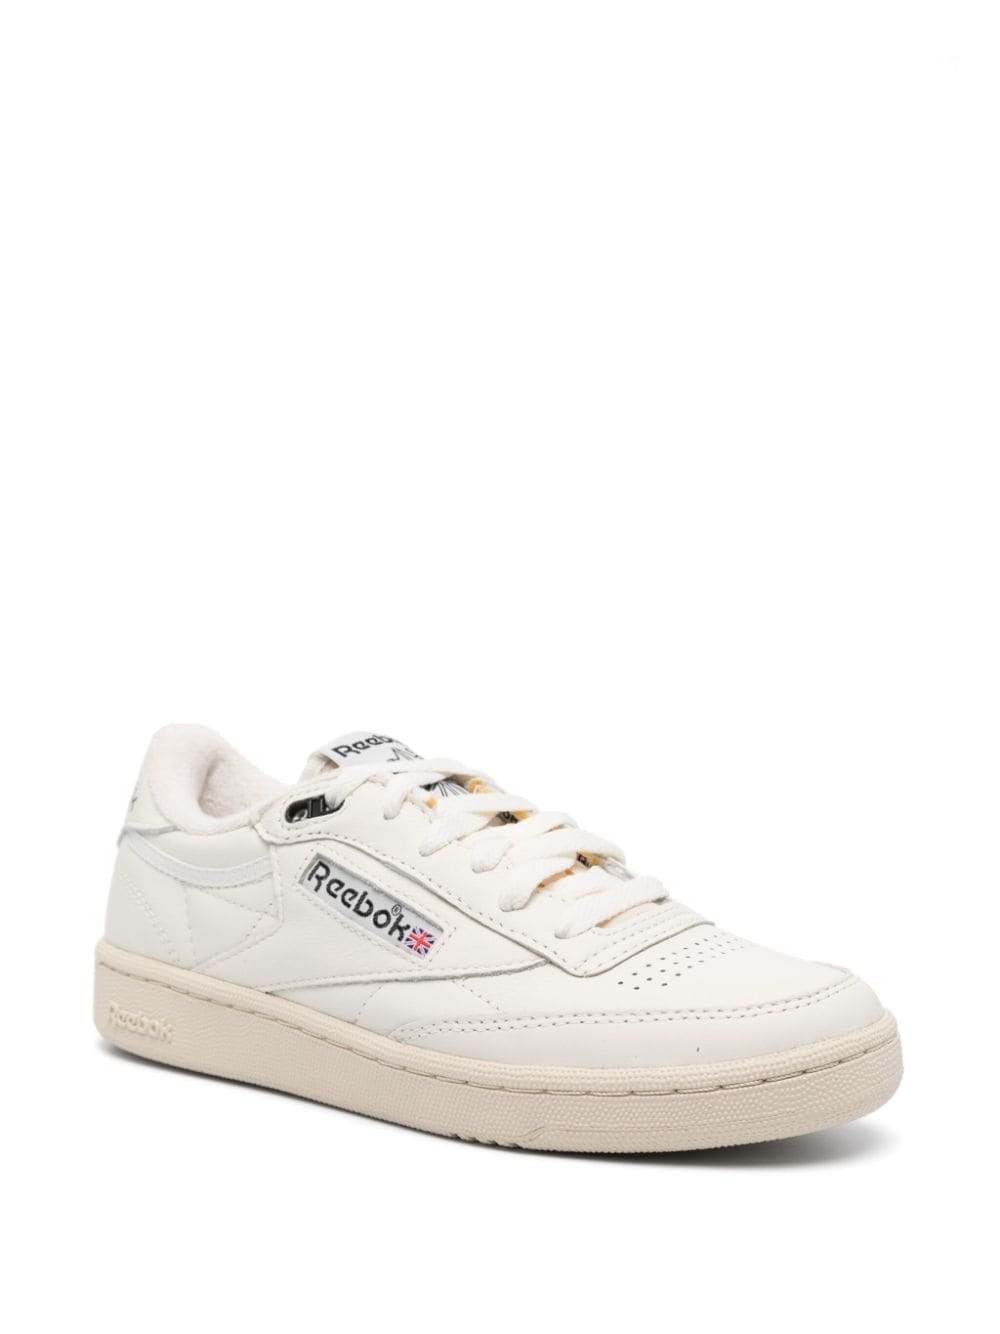 Club C 85 leather sneakers - 2